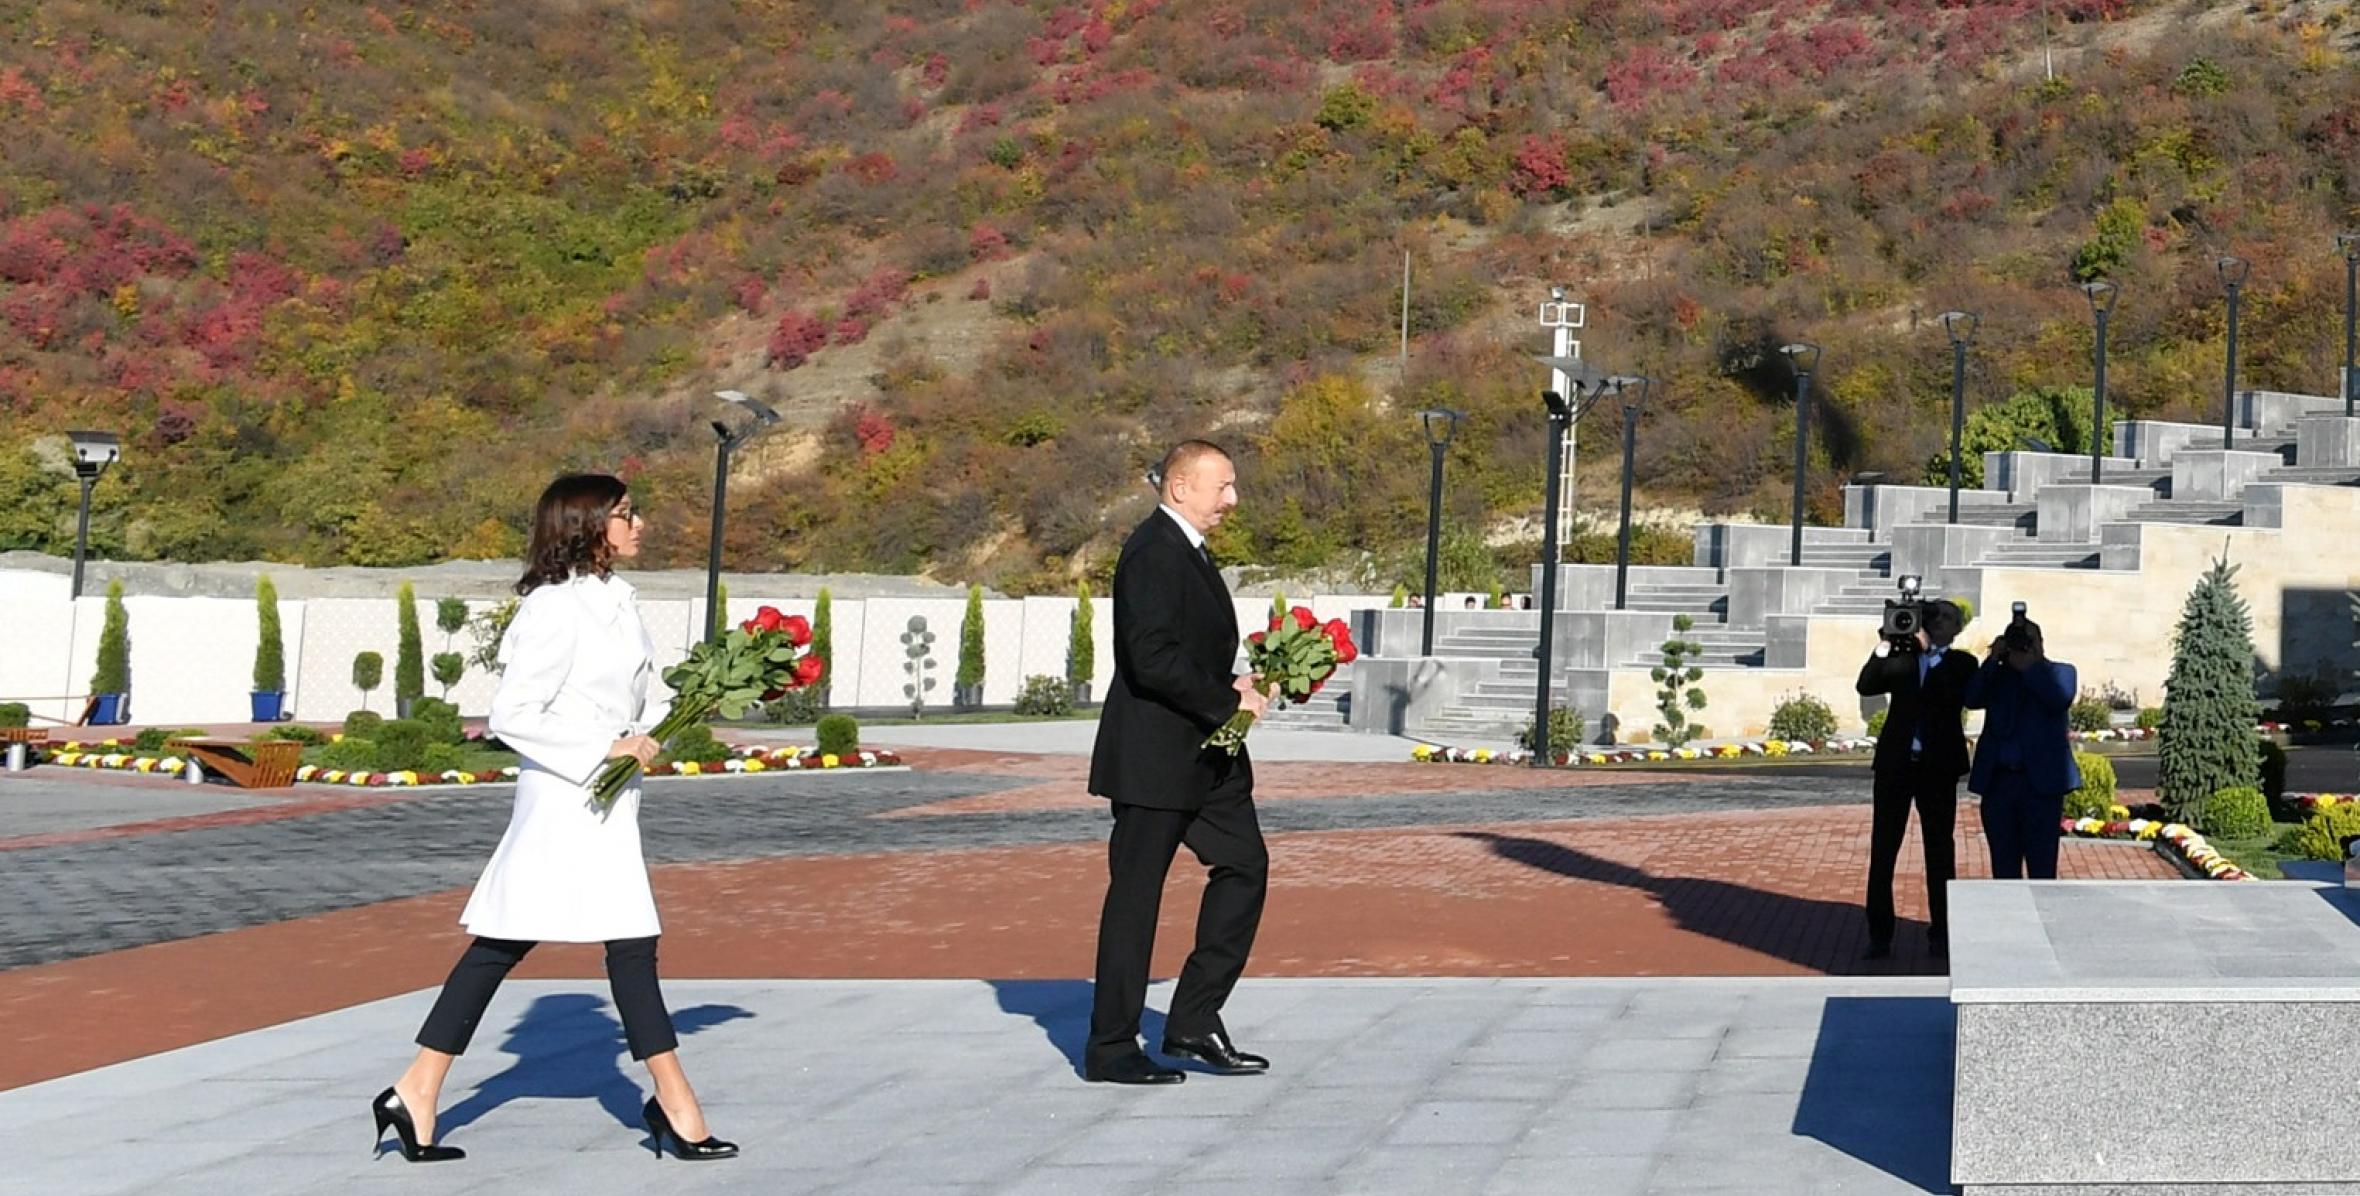 Ilham Aliyev arrived in the city of Shaki for visit